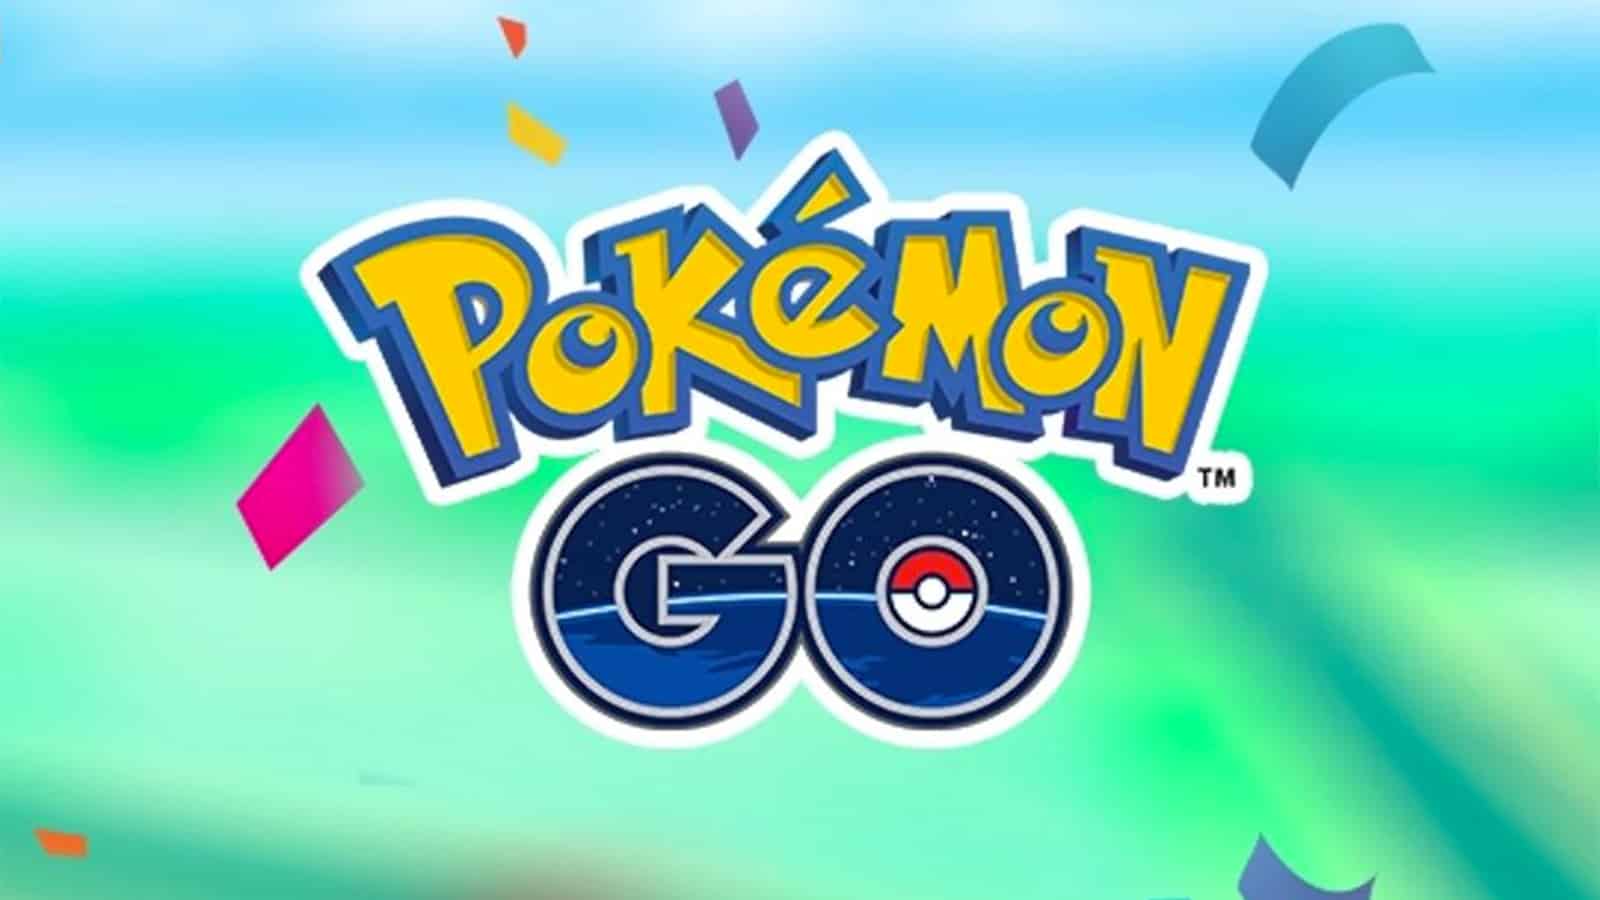 Why is there confetti falling from the sky in Pokemon Go? Dexerto